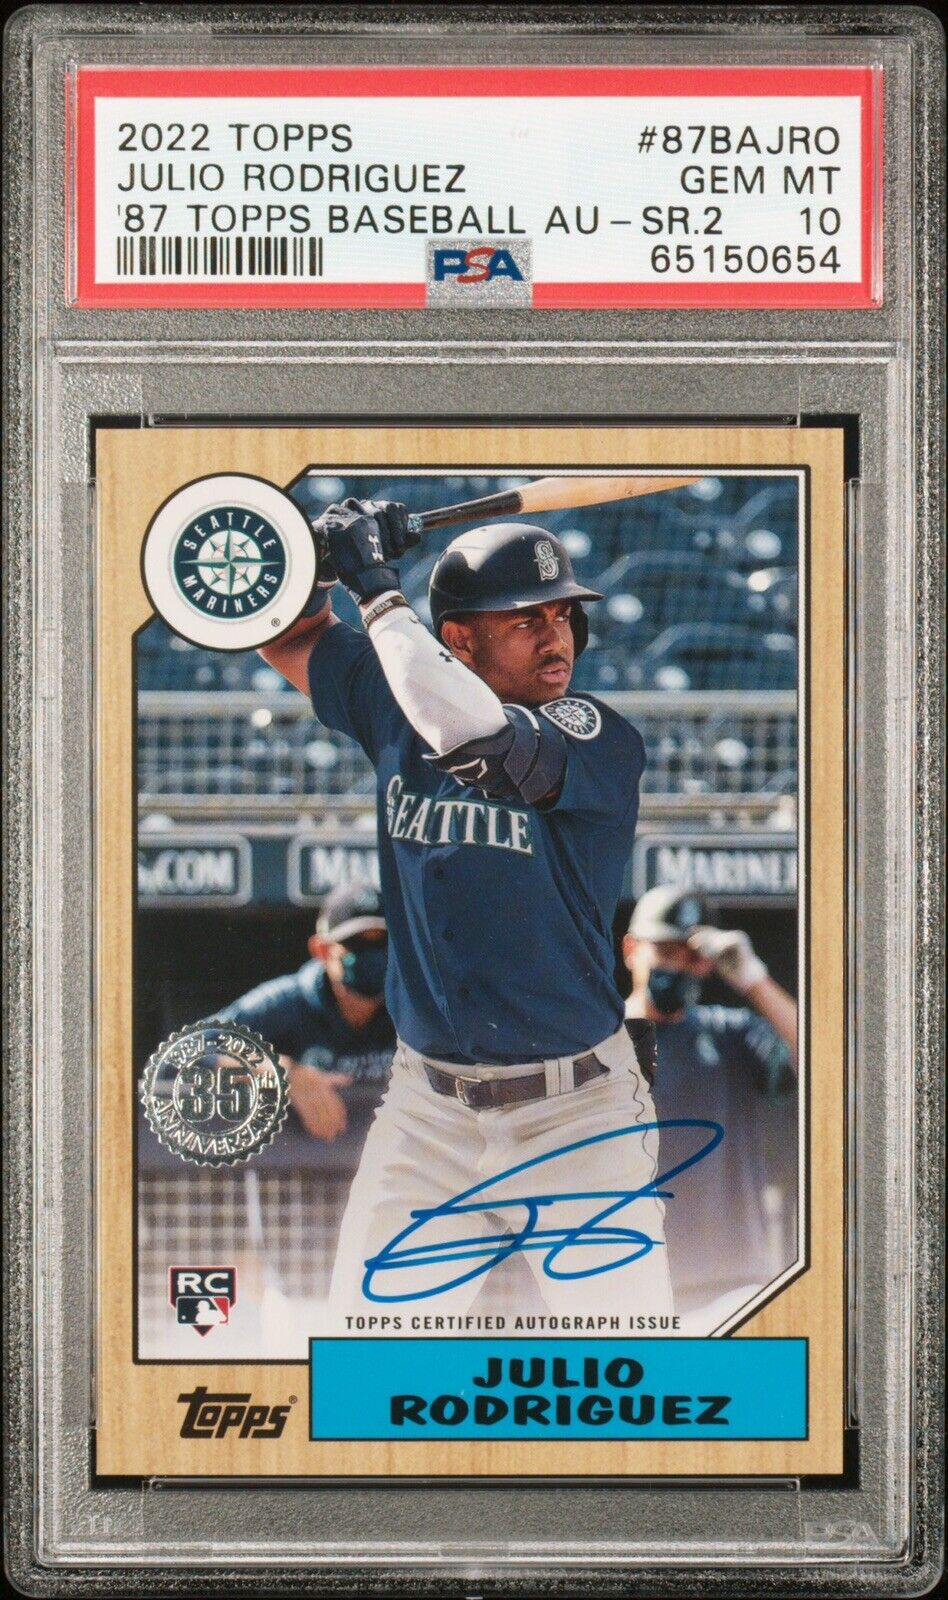 Ronald Acuna Jr. 2 Hr's Bring Red Hot Star To 19-for-35 Topps Now Auto